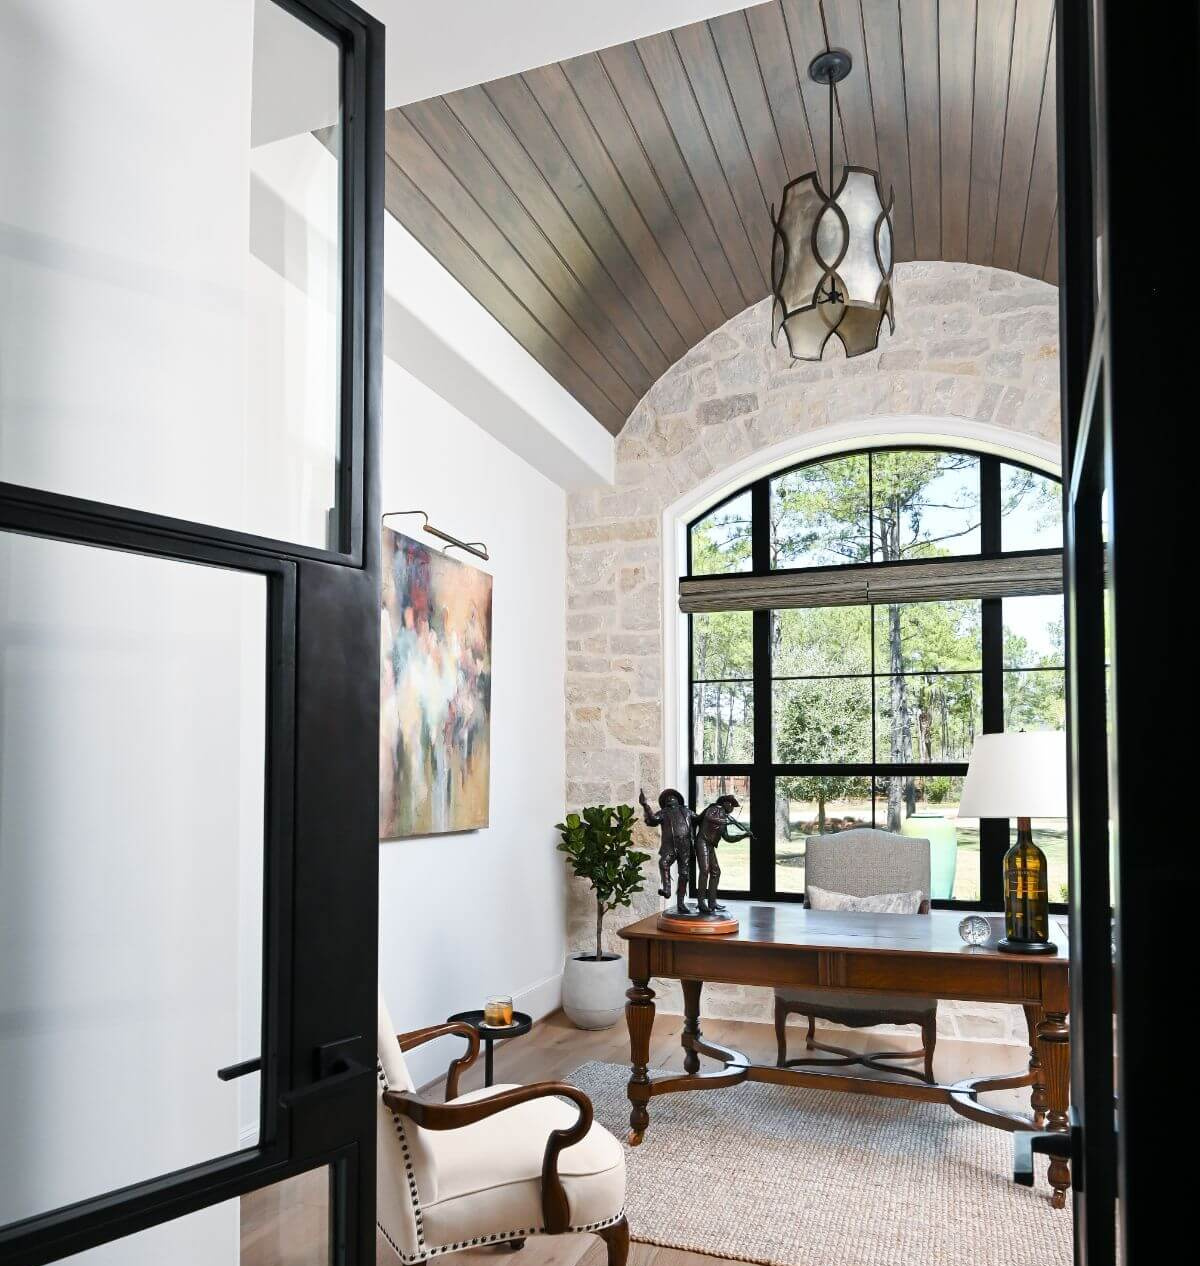 Beautiful steel doors to a modern French home office in a home by Morningstar Builders. #homeoffices #modernfrench